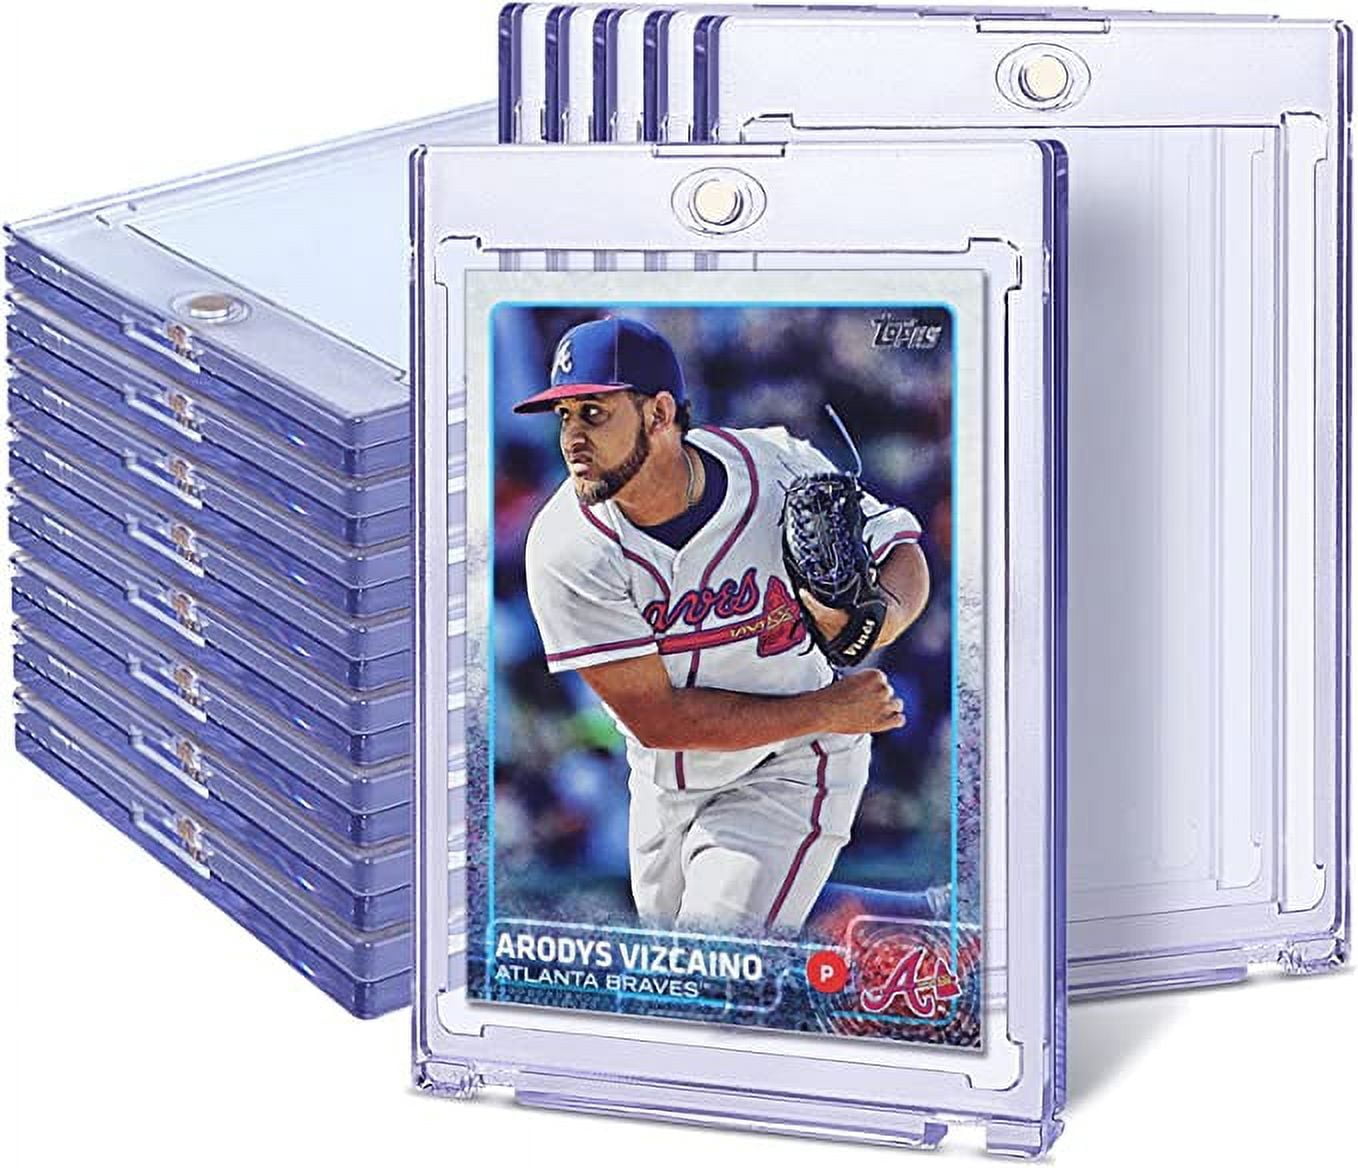 50ct Magnetic Card Holder 35pt, Card case Holder for Trading Cards，Card  Protectors Hard Plastic, Card Sleeves Display case for Baseball Card Sports